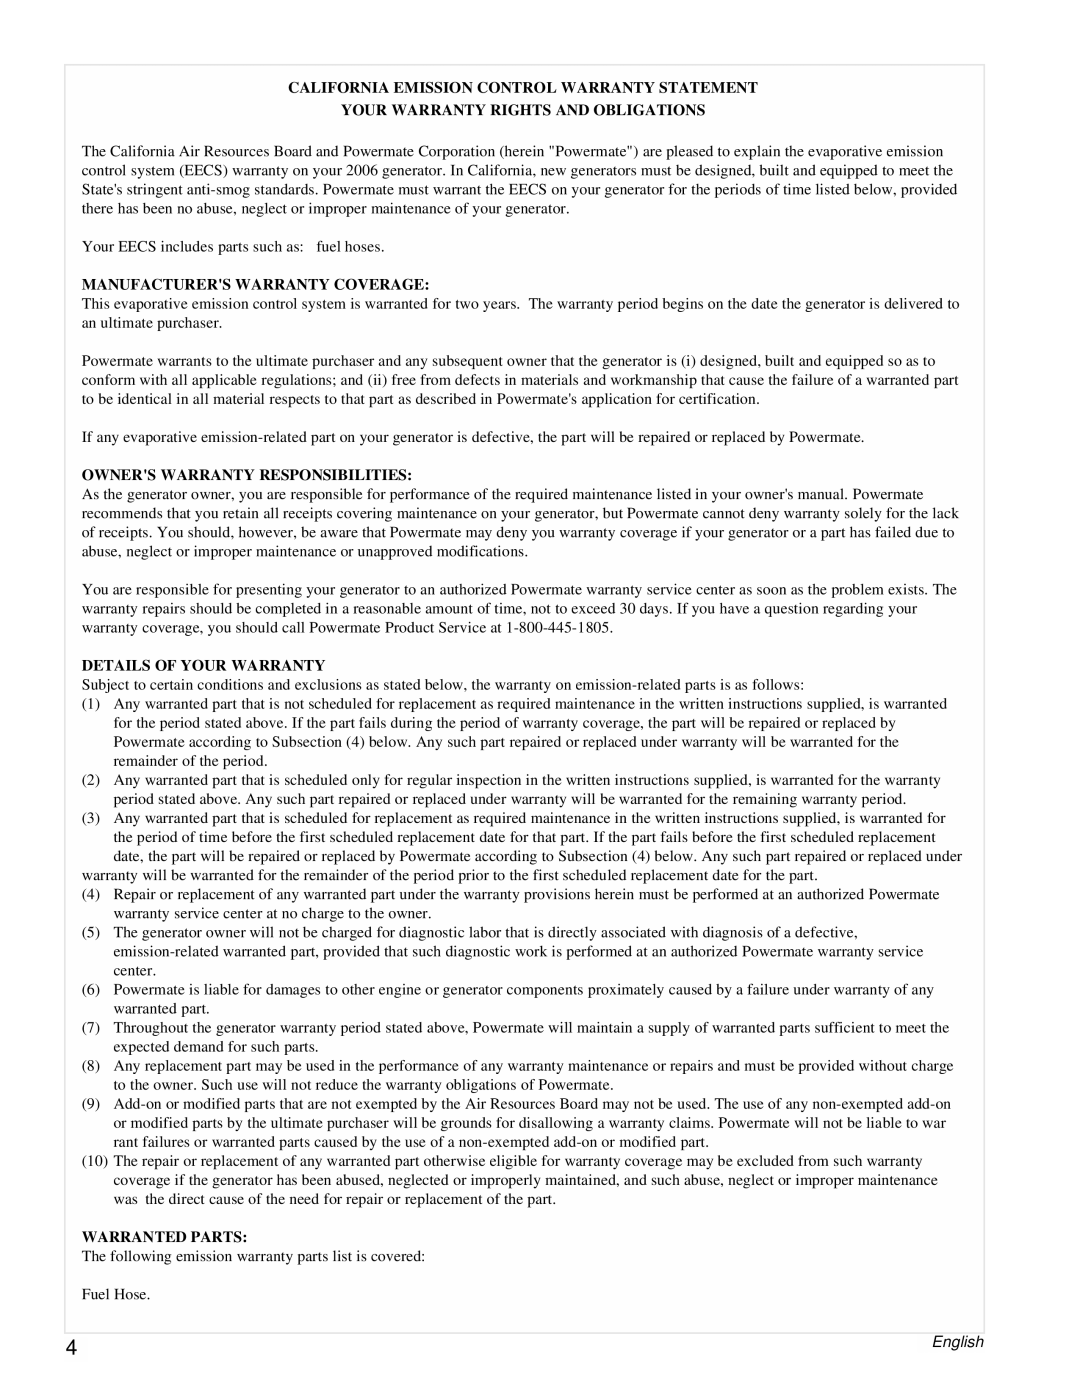 Powermate PMC543250 California Emission Control Warranty Statement, Your Warranty Rights And Obligations, Warranted Parts 